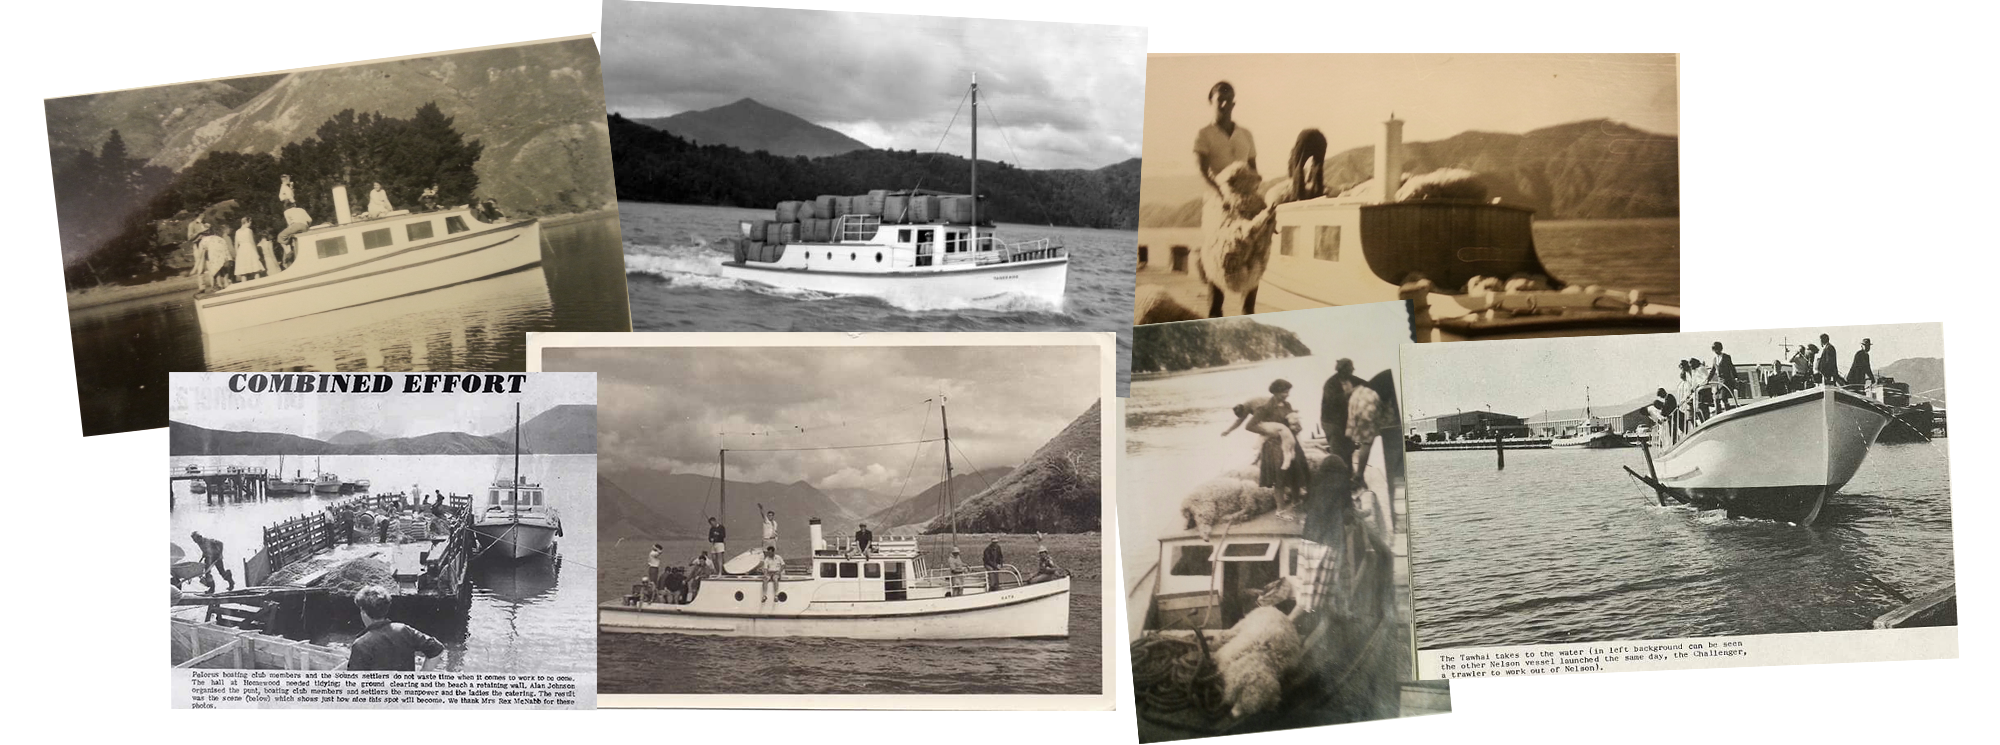 A collection historic images from Pelorus Mail Boat times past